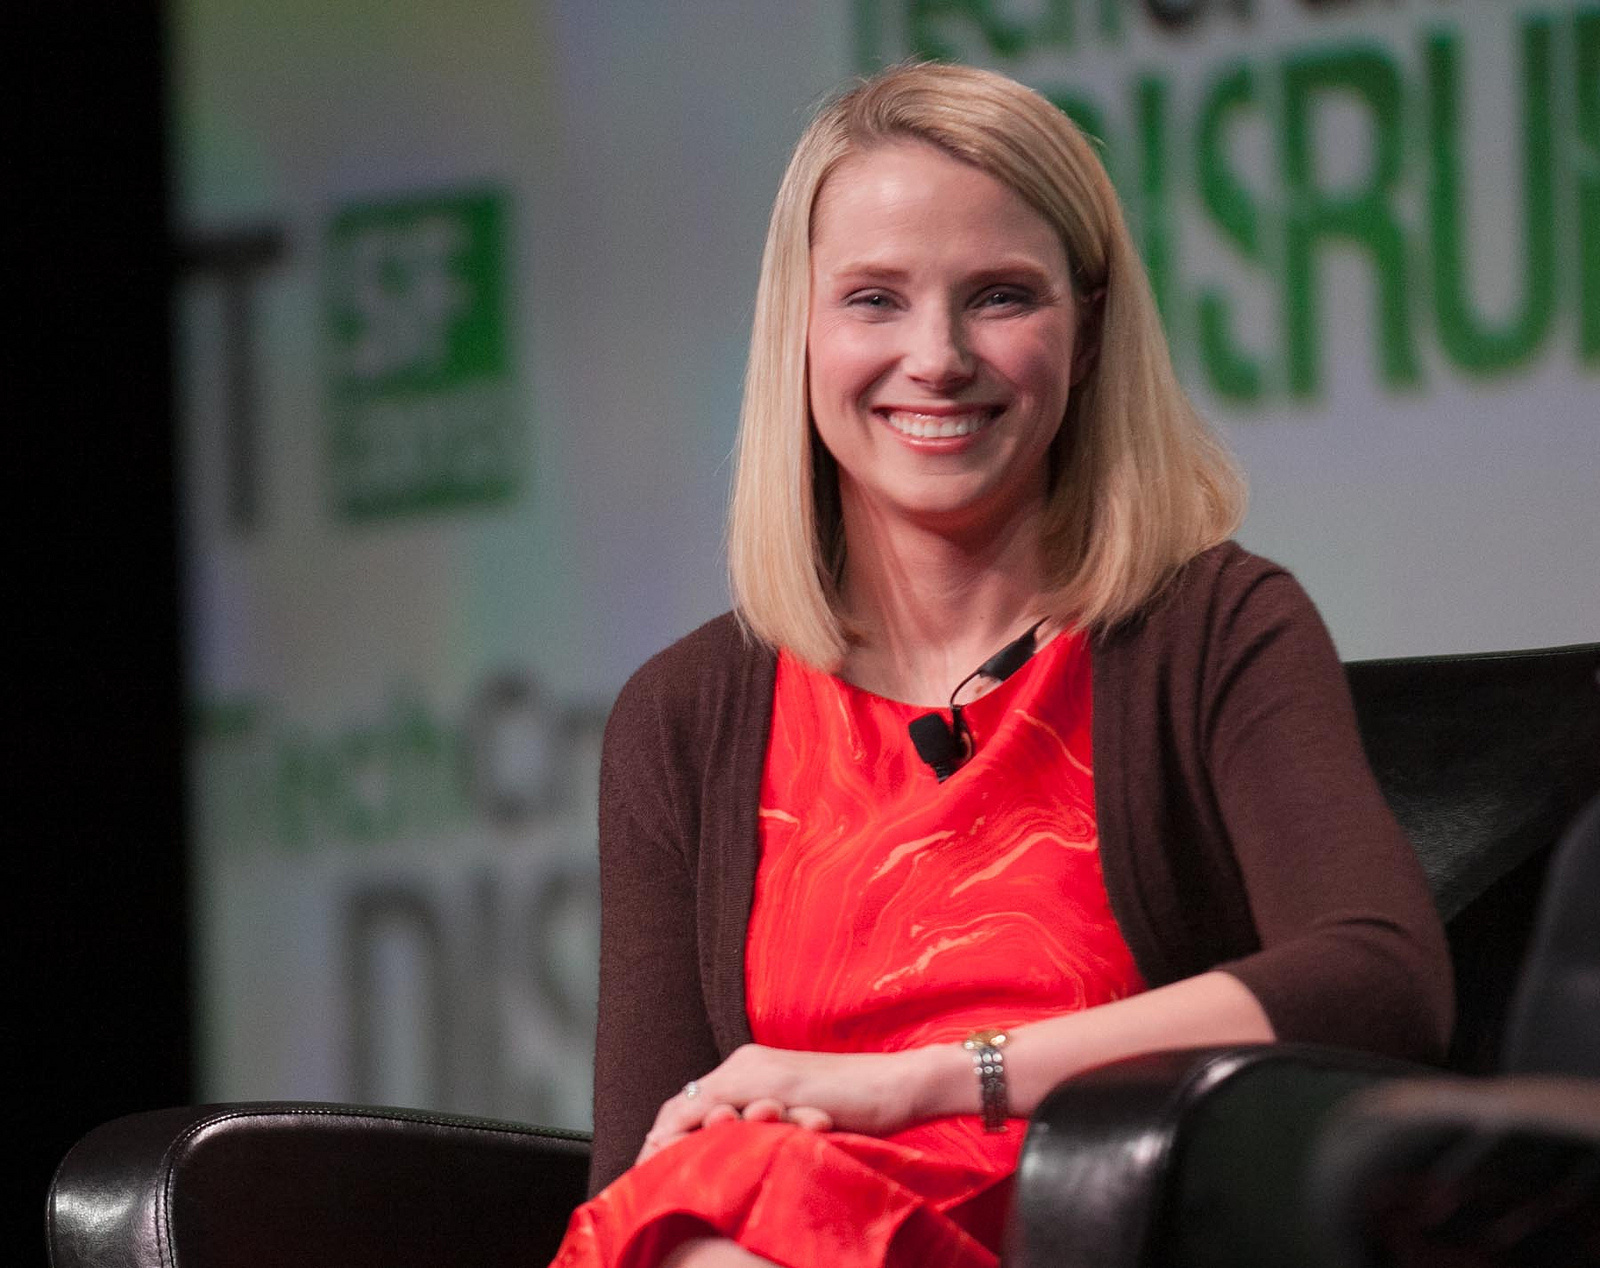 Marissa Mayer, who is the CEO of Yahoo, became the first ever female to be employed by Google. That happened back in 1999 and she turned it into a pretty nice career.